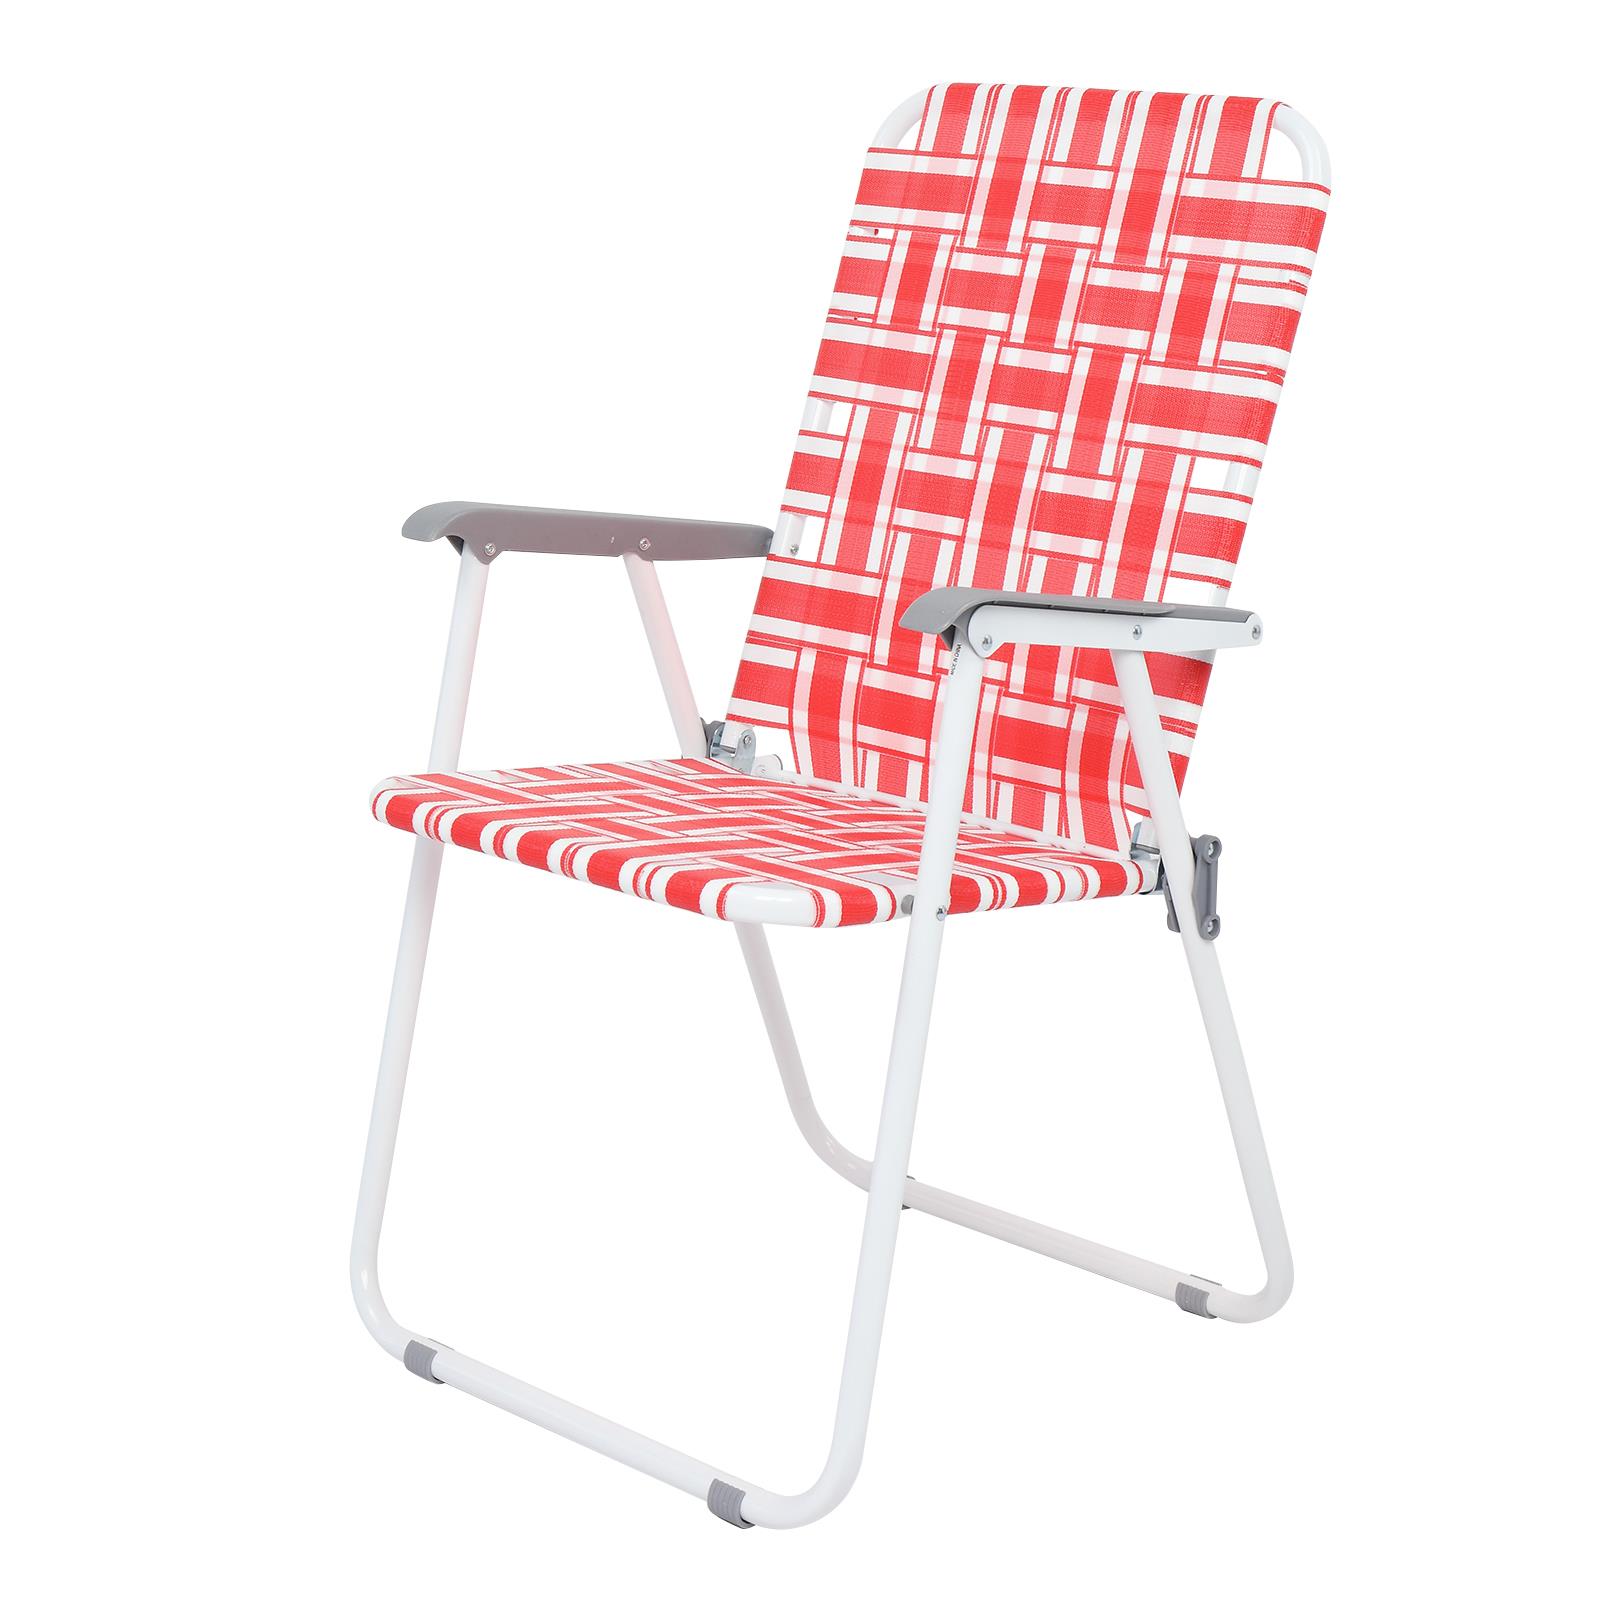 SamyoHome 2 Pack Lawn Chair Set Patio Folding Web Outdoor Portable Camping Chair(Red & White) - image 5 of 6